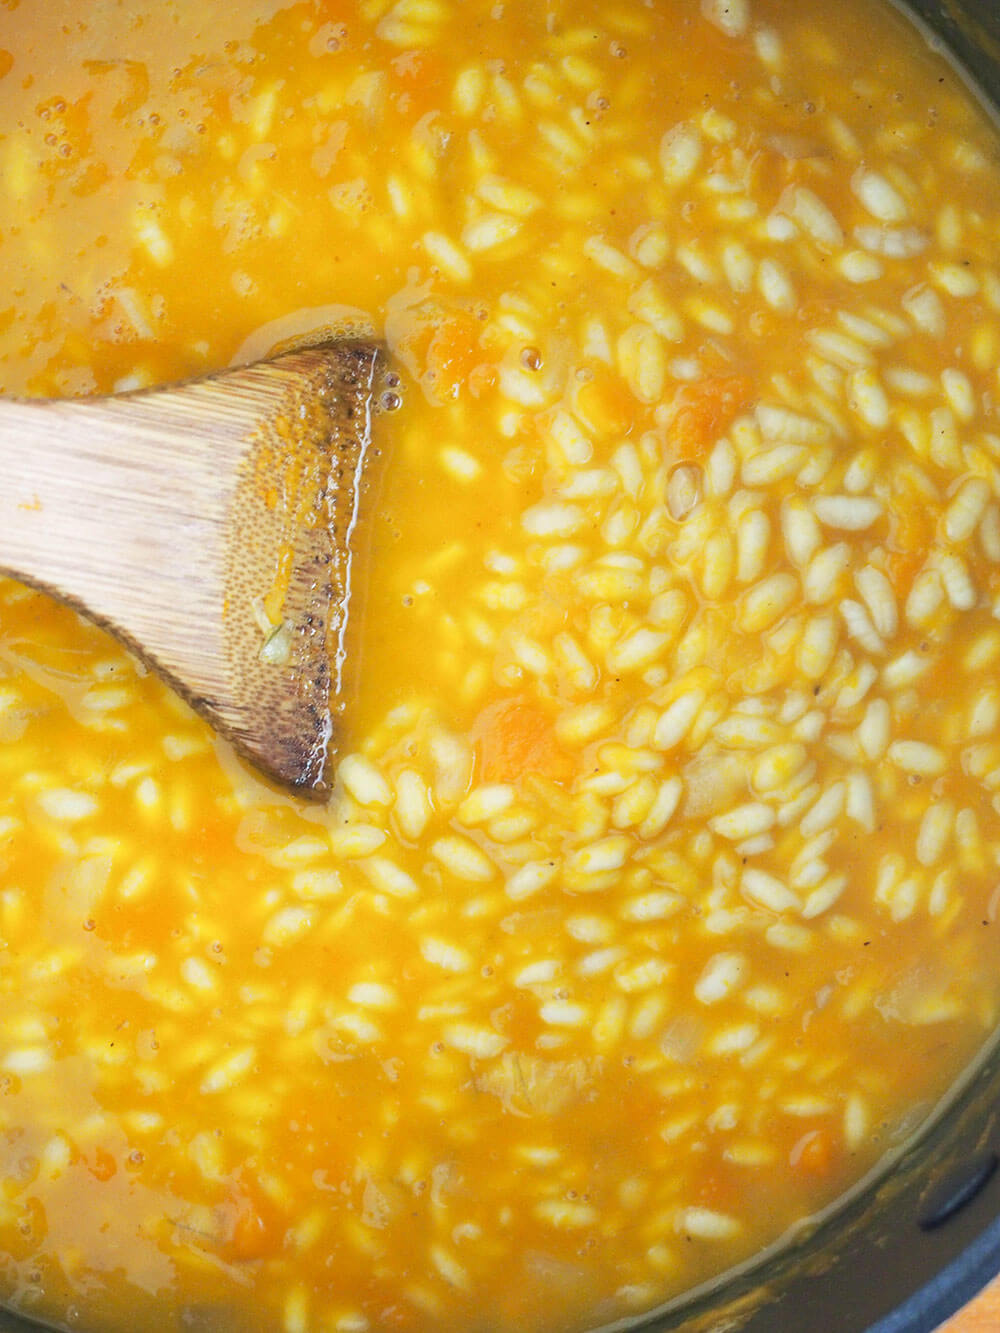 stock added to pumpkin risotto during cooking